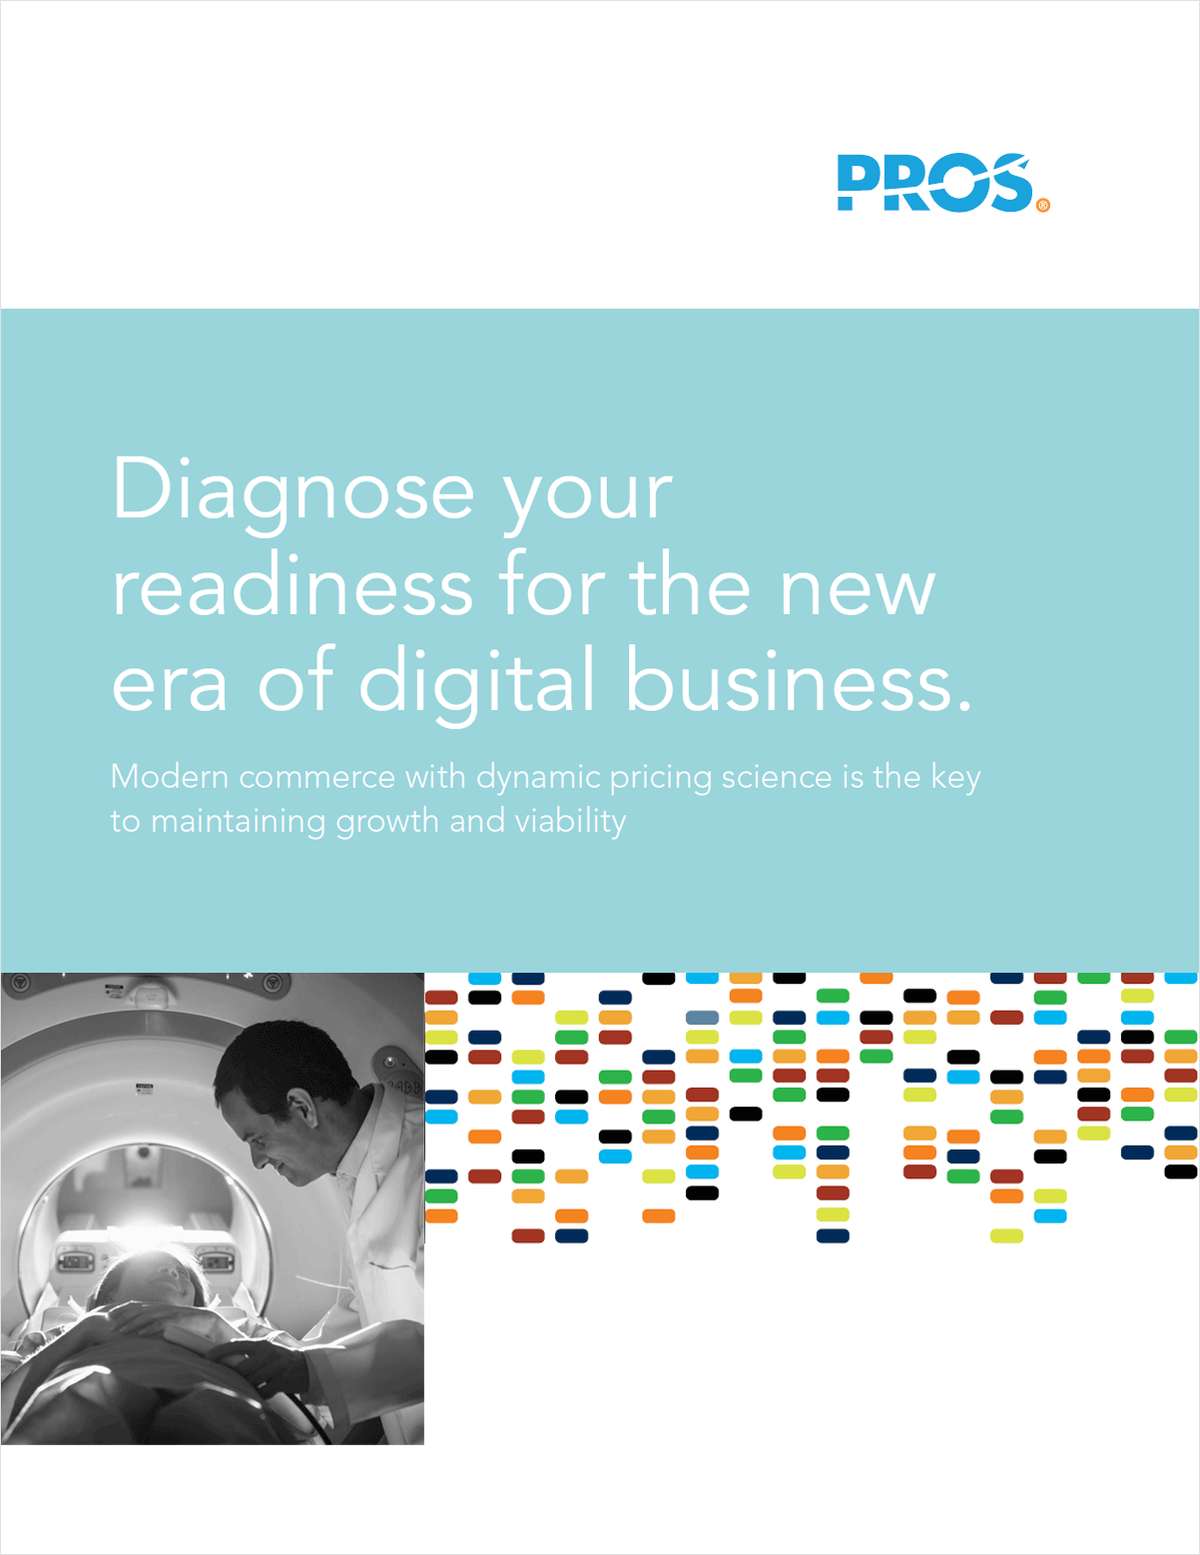 Diagnose Your Readiness for the New Era of Digital Business